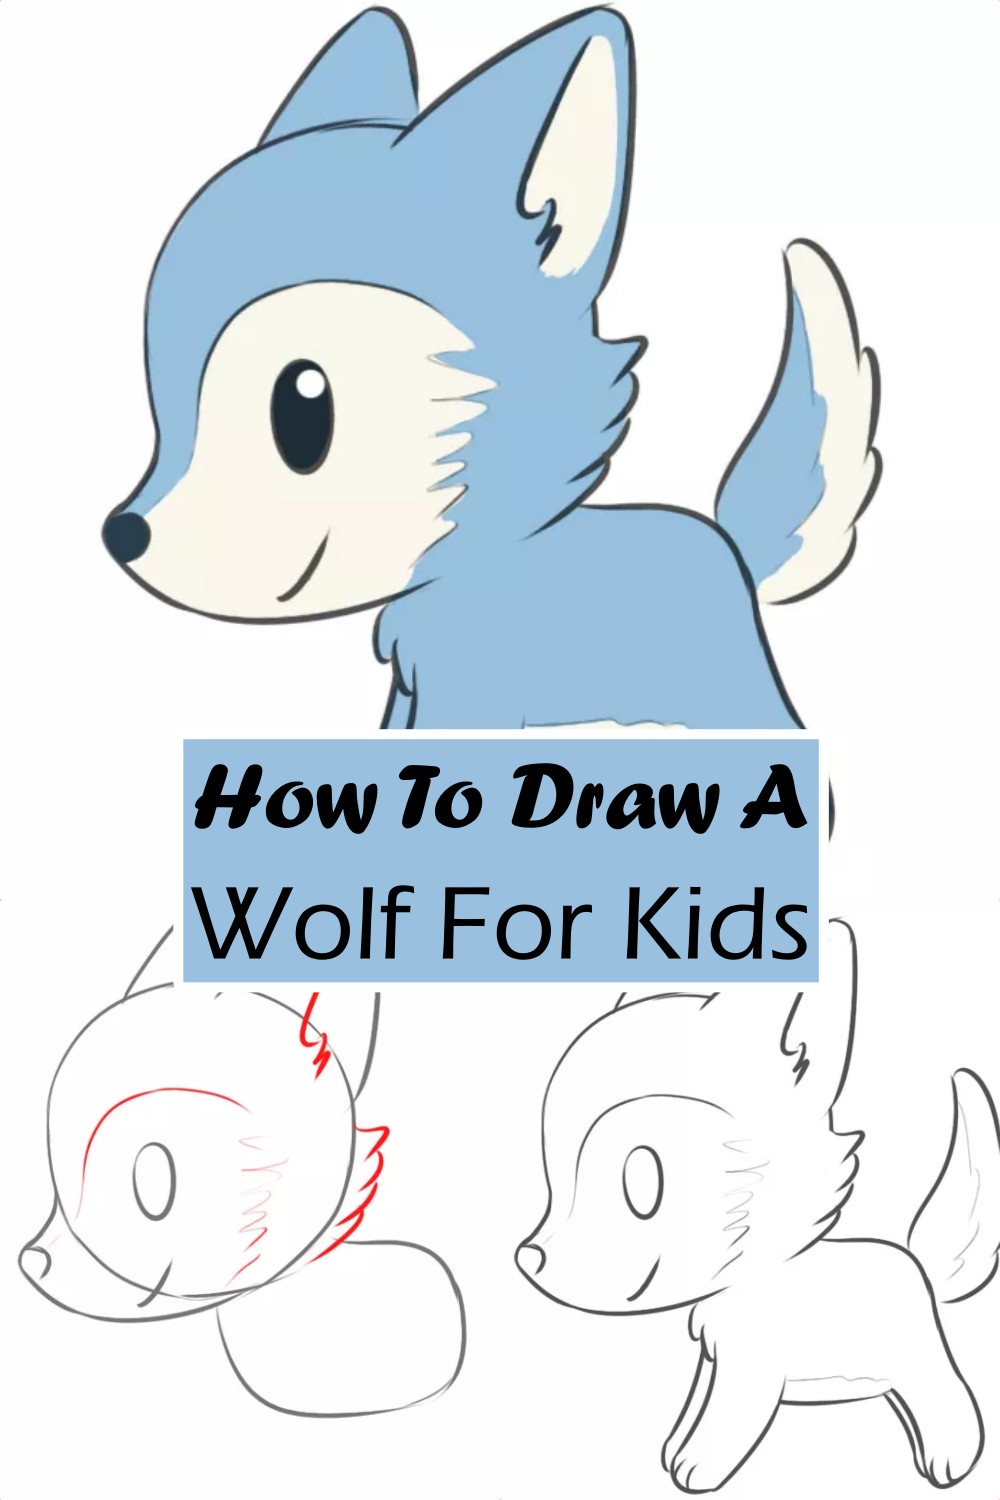 How To Draw A Wolf For Kids